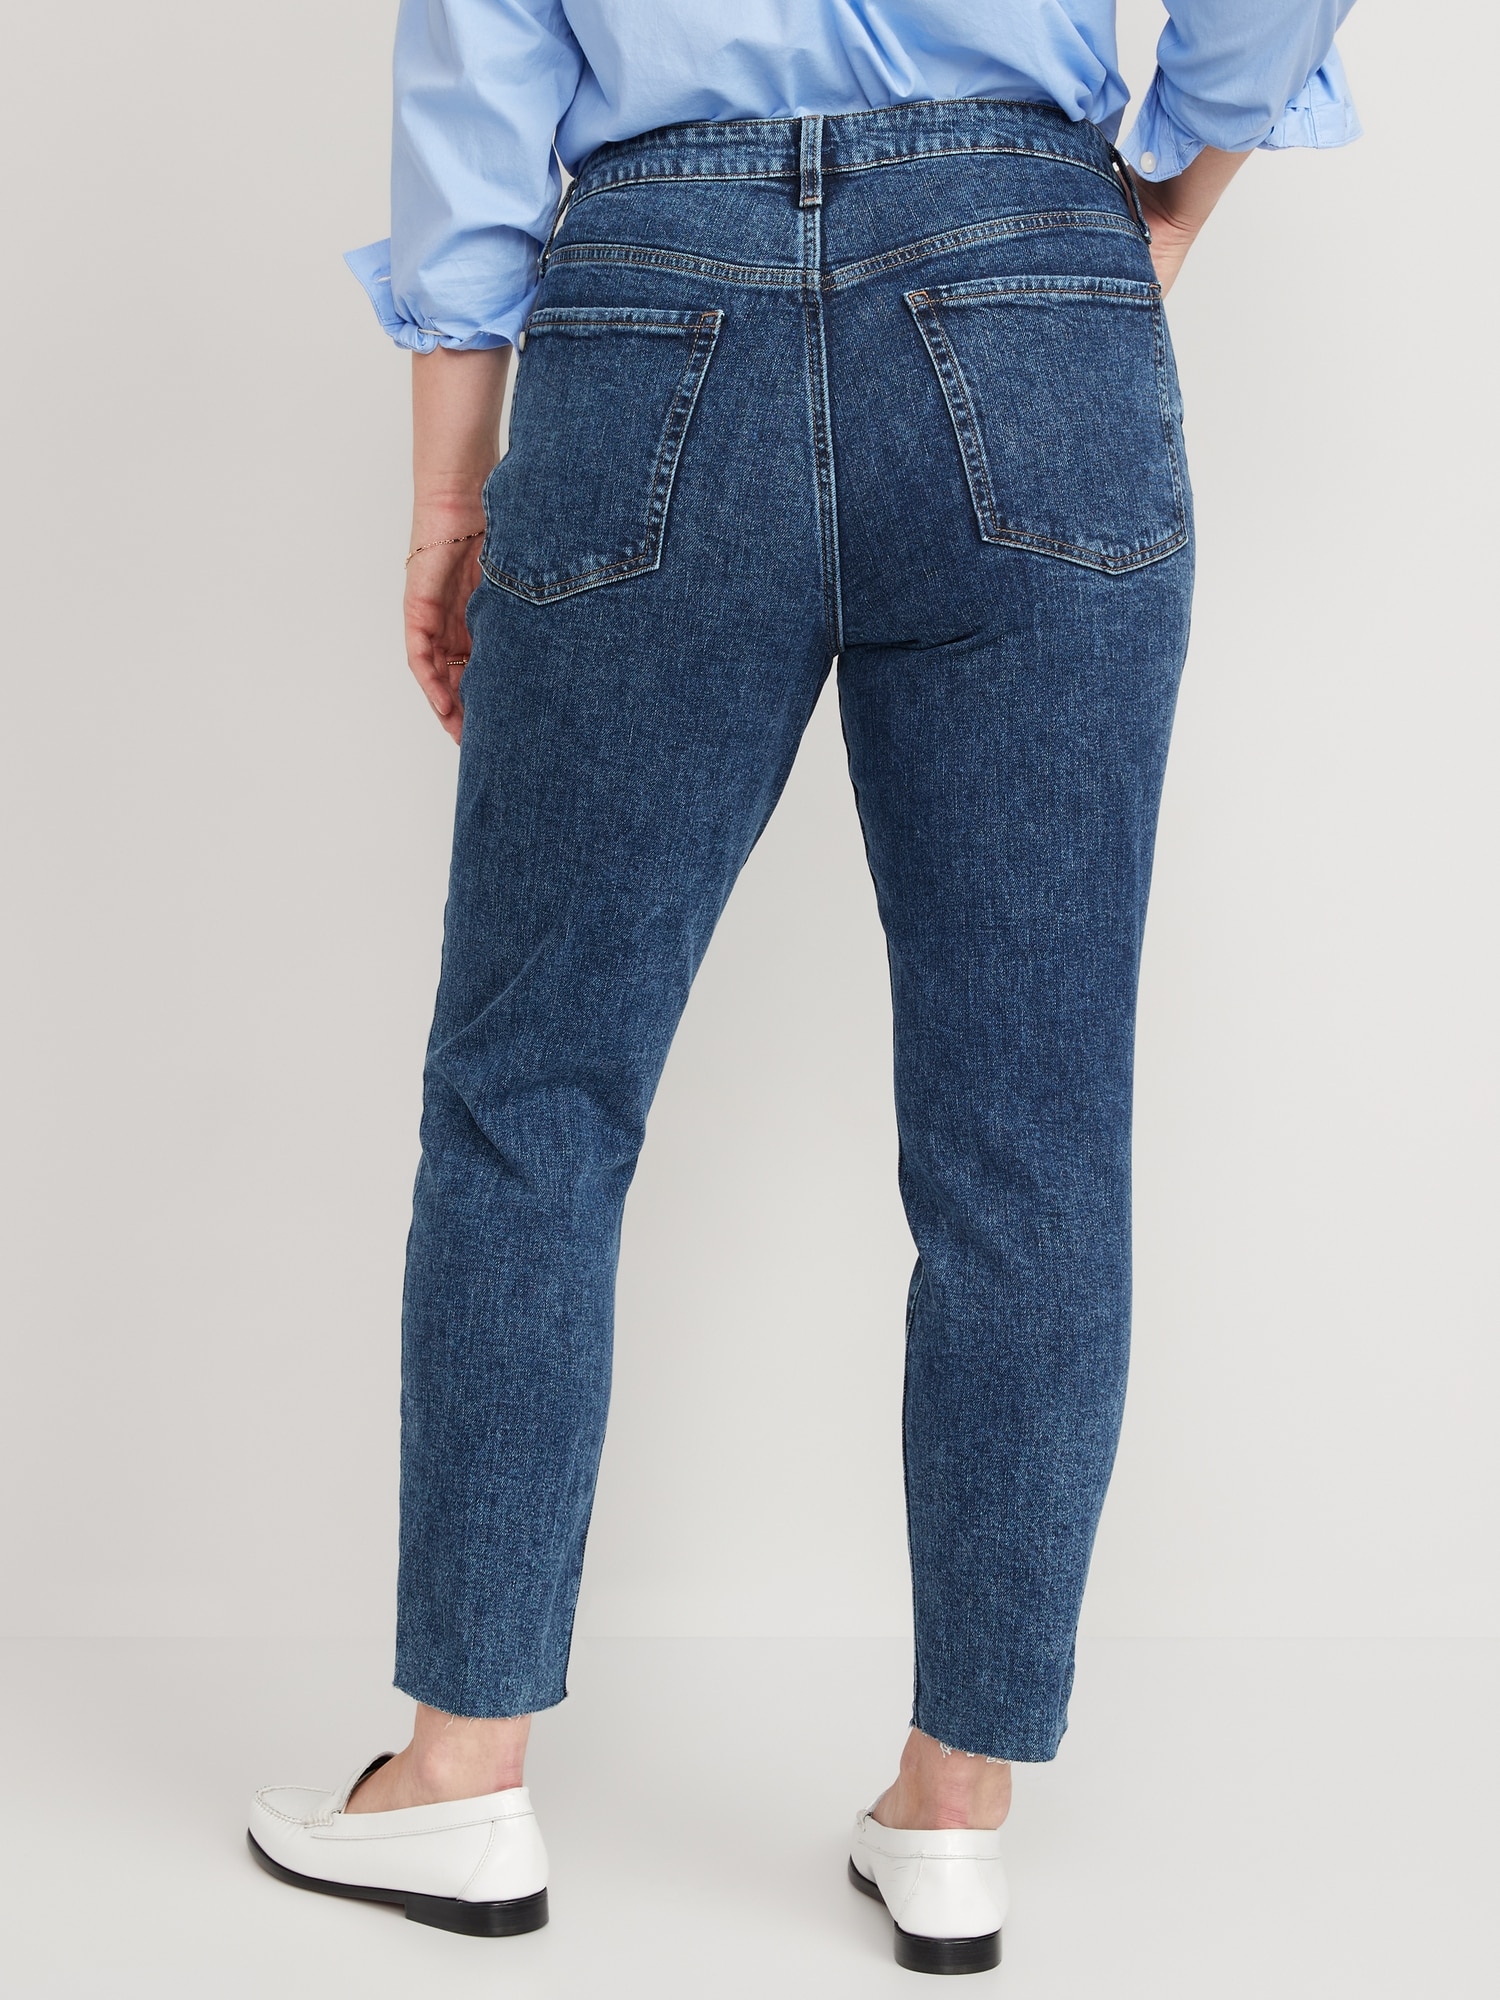 High-Waisted O.G. Straight Ripped Cut-Off Jeans for Women